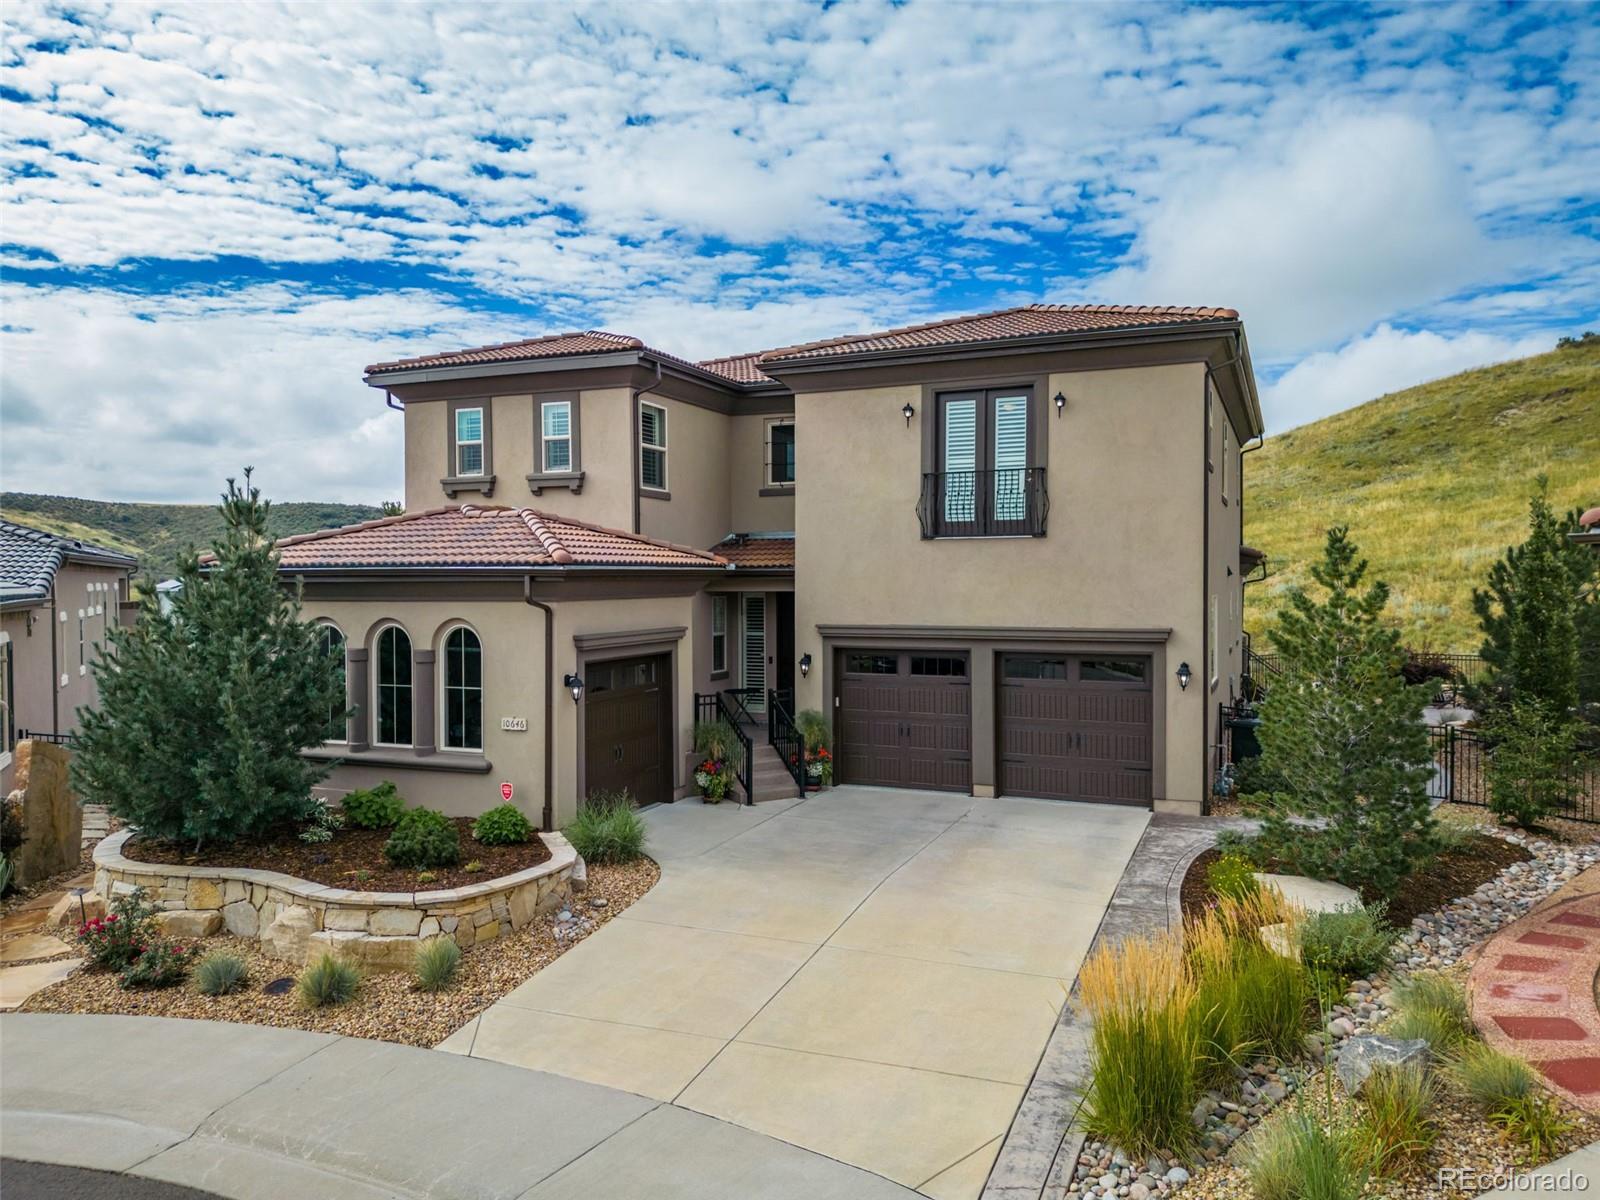 10646  Ladera Point, lone tree MLS: 6179836 Beds: 3 Baths: 4 Price: $1,699,999